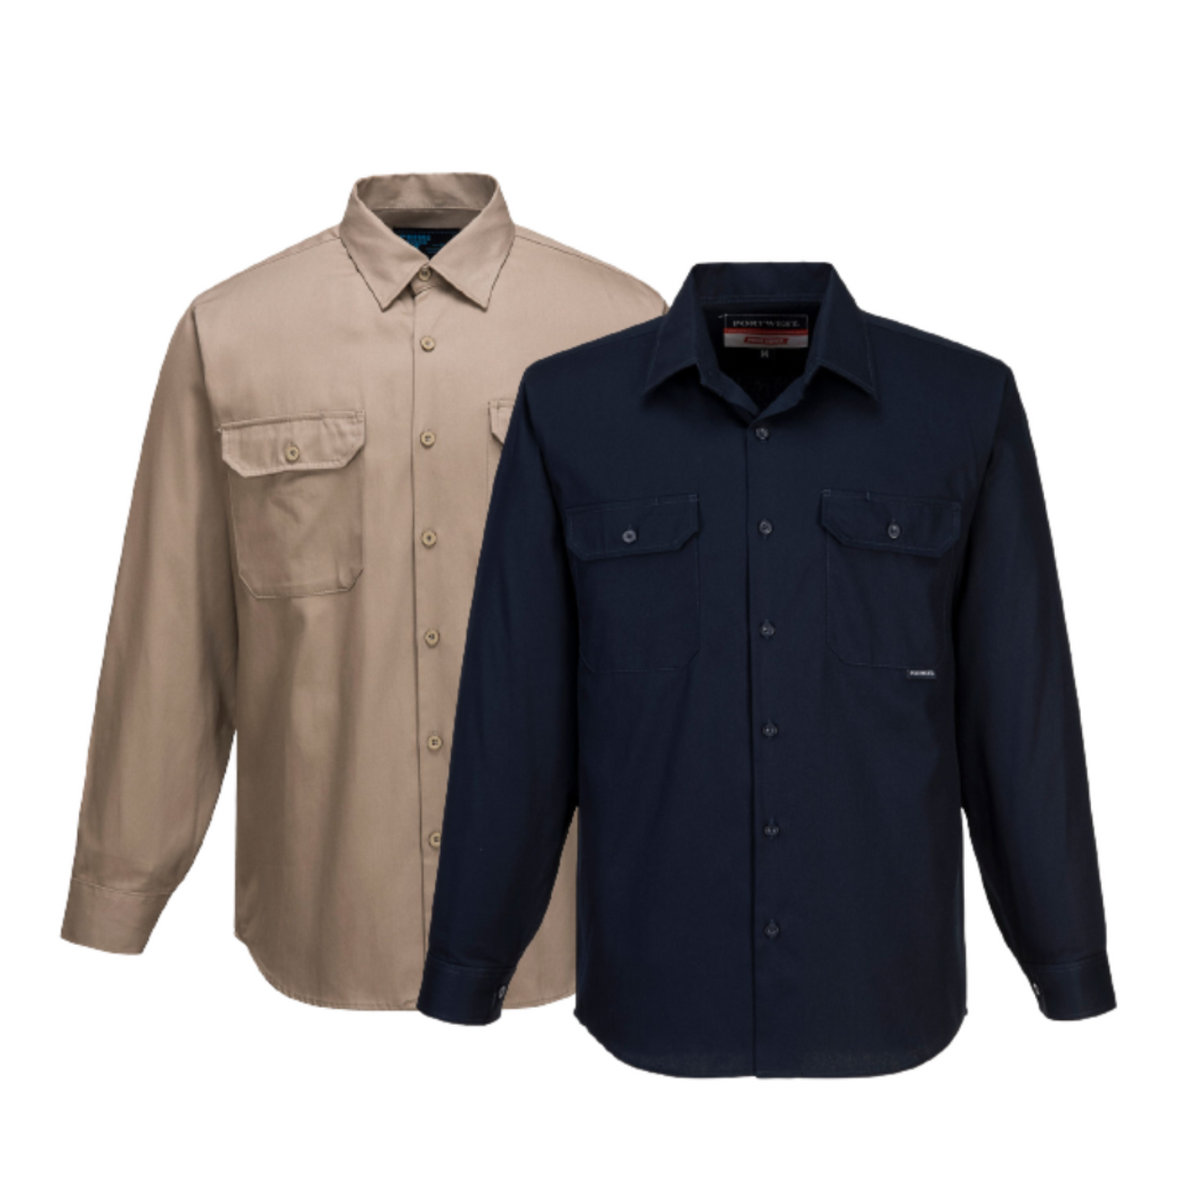 Portwest Adelaide Shirt, Long Sleeve, Regular Weight Button Front Closure MS903-Collins Clothing Co